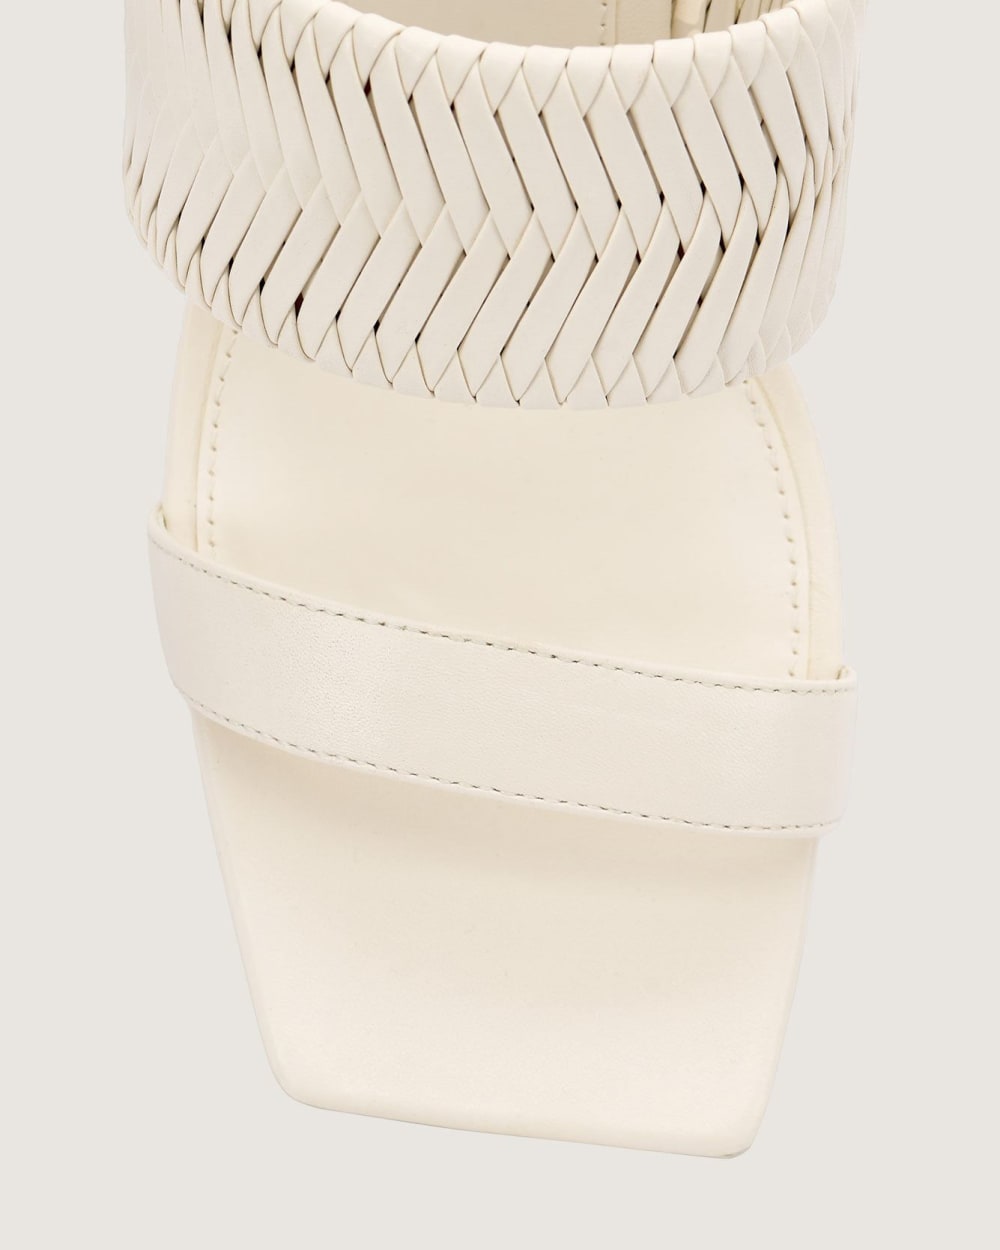 Regular Width, Slip On Mule with Chevron Strap - Vince Camuto